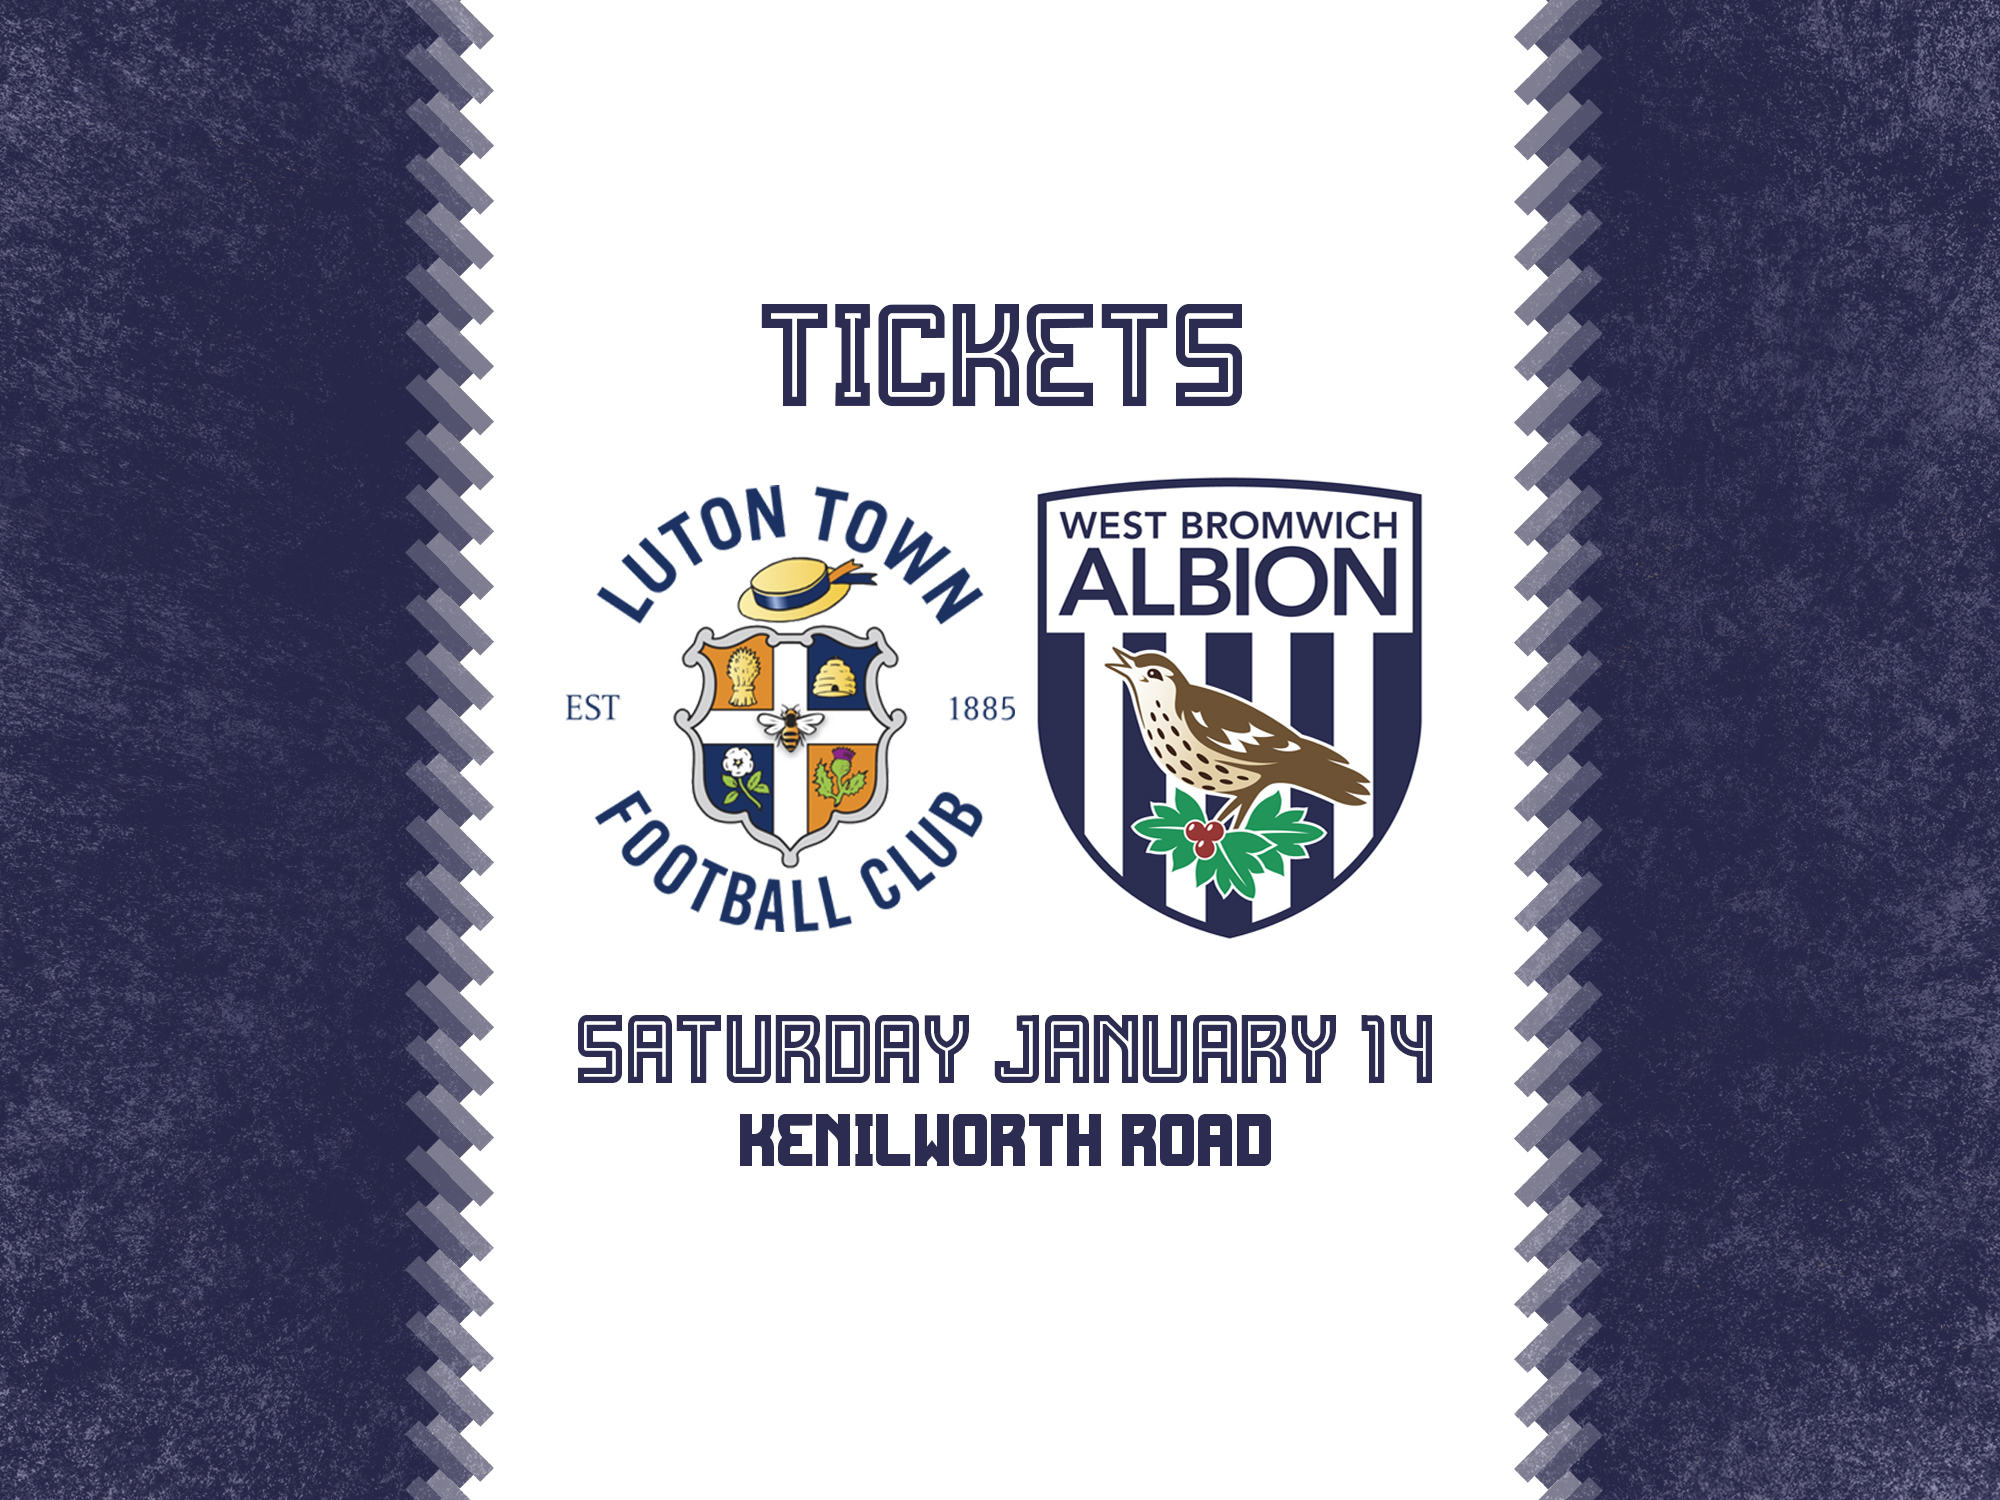 A ticket graphic advertising Albion's match against Luton Town